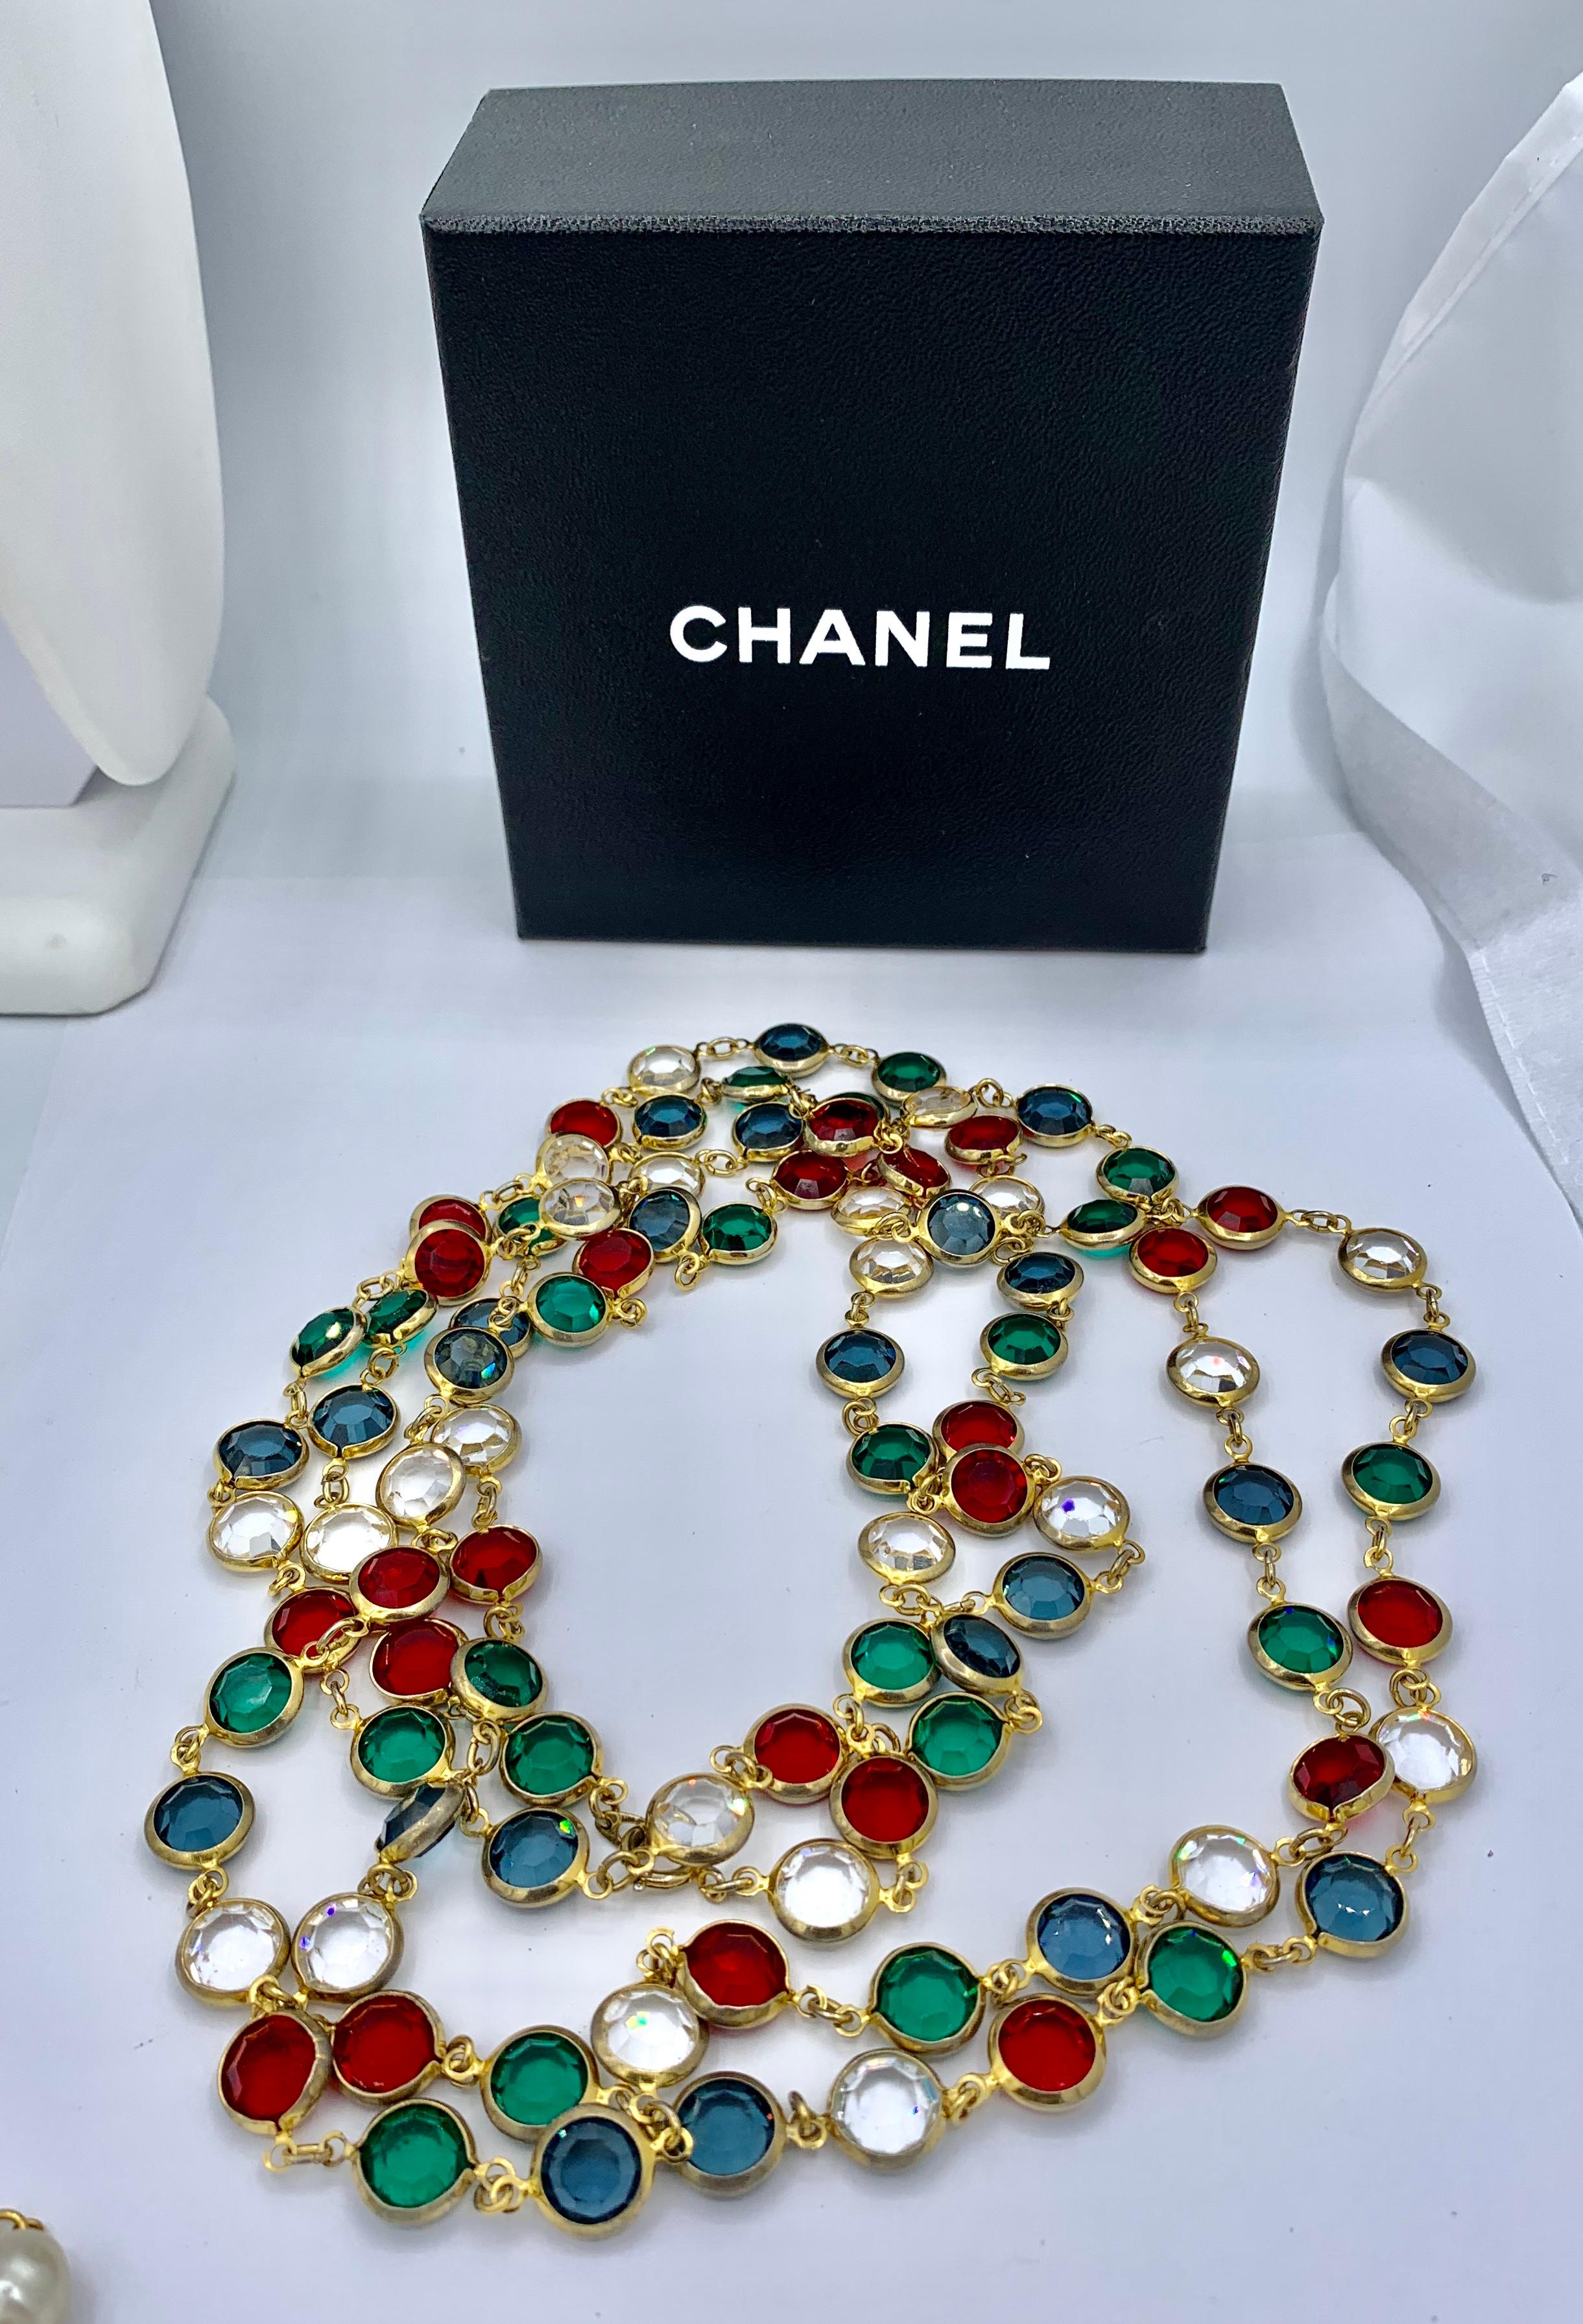 Two Chanel Gripoix Necklaces 1981 Signed Estate of Barbara Taylor Bradford In Excellent Condition For Sale In New York, NY